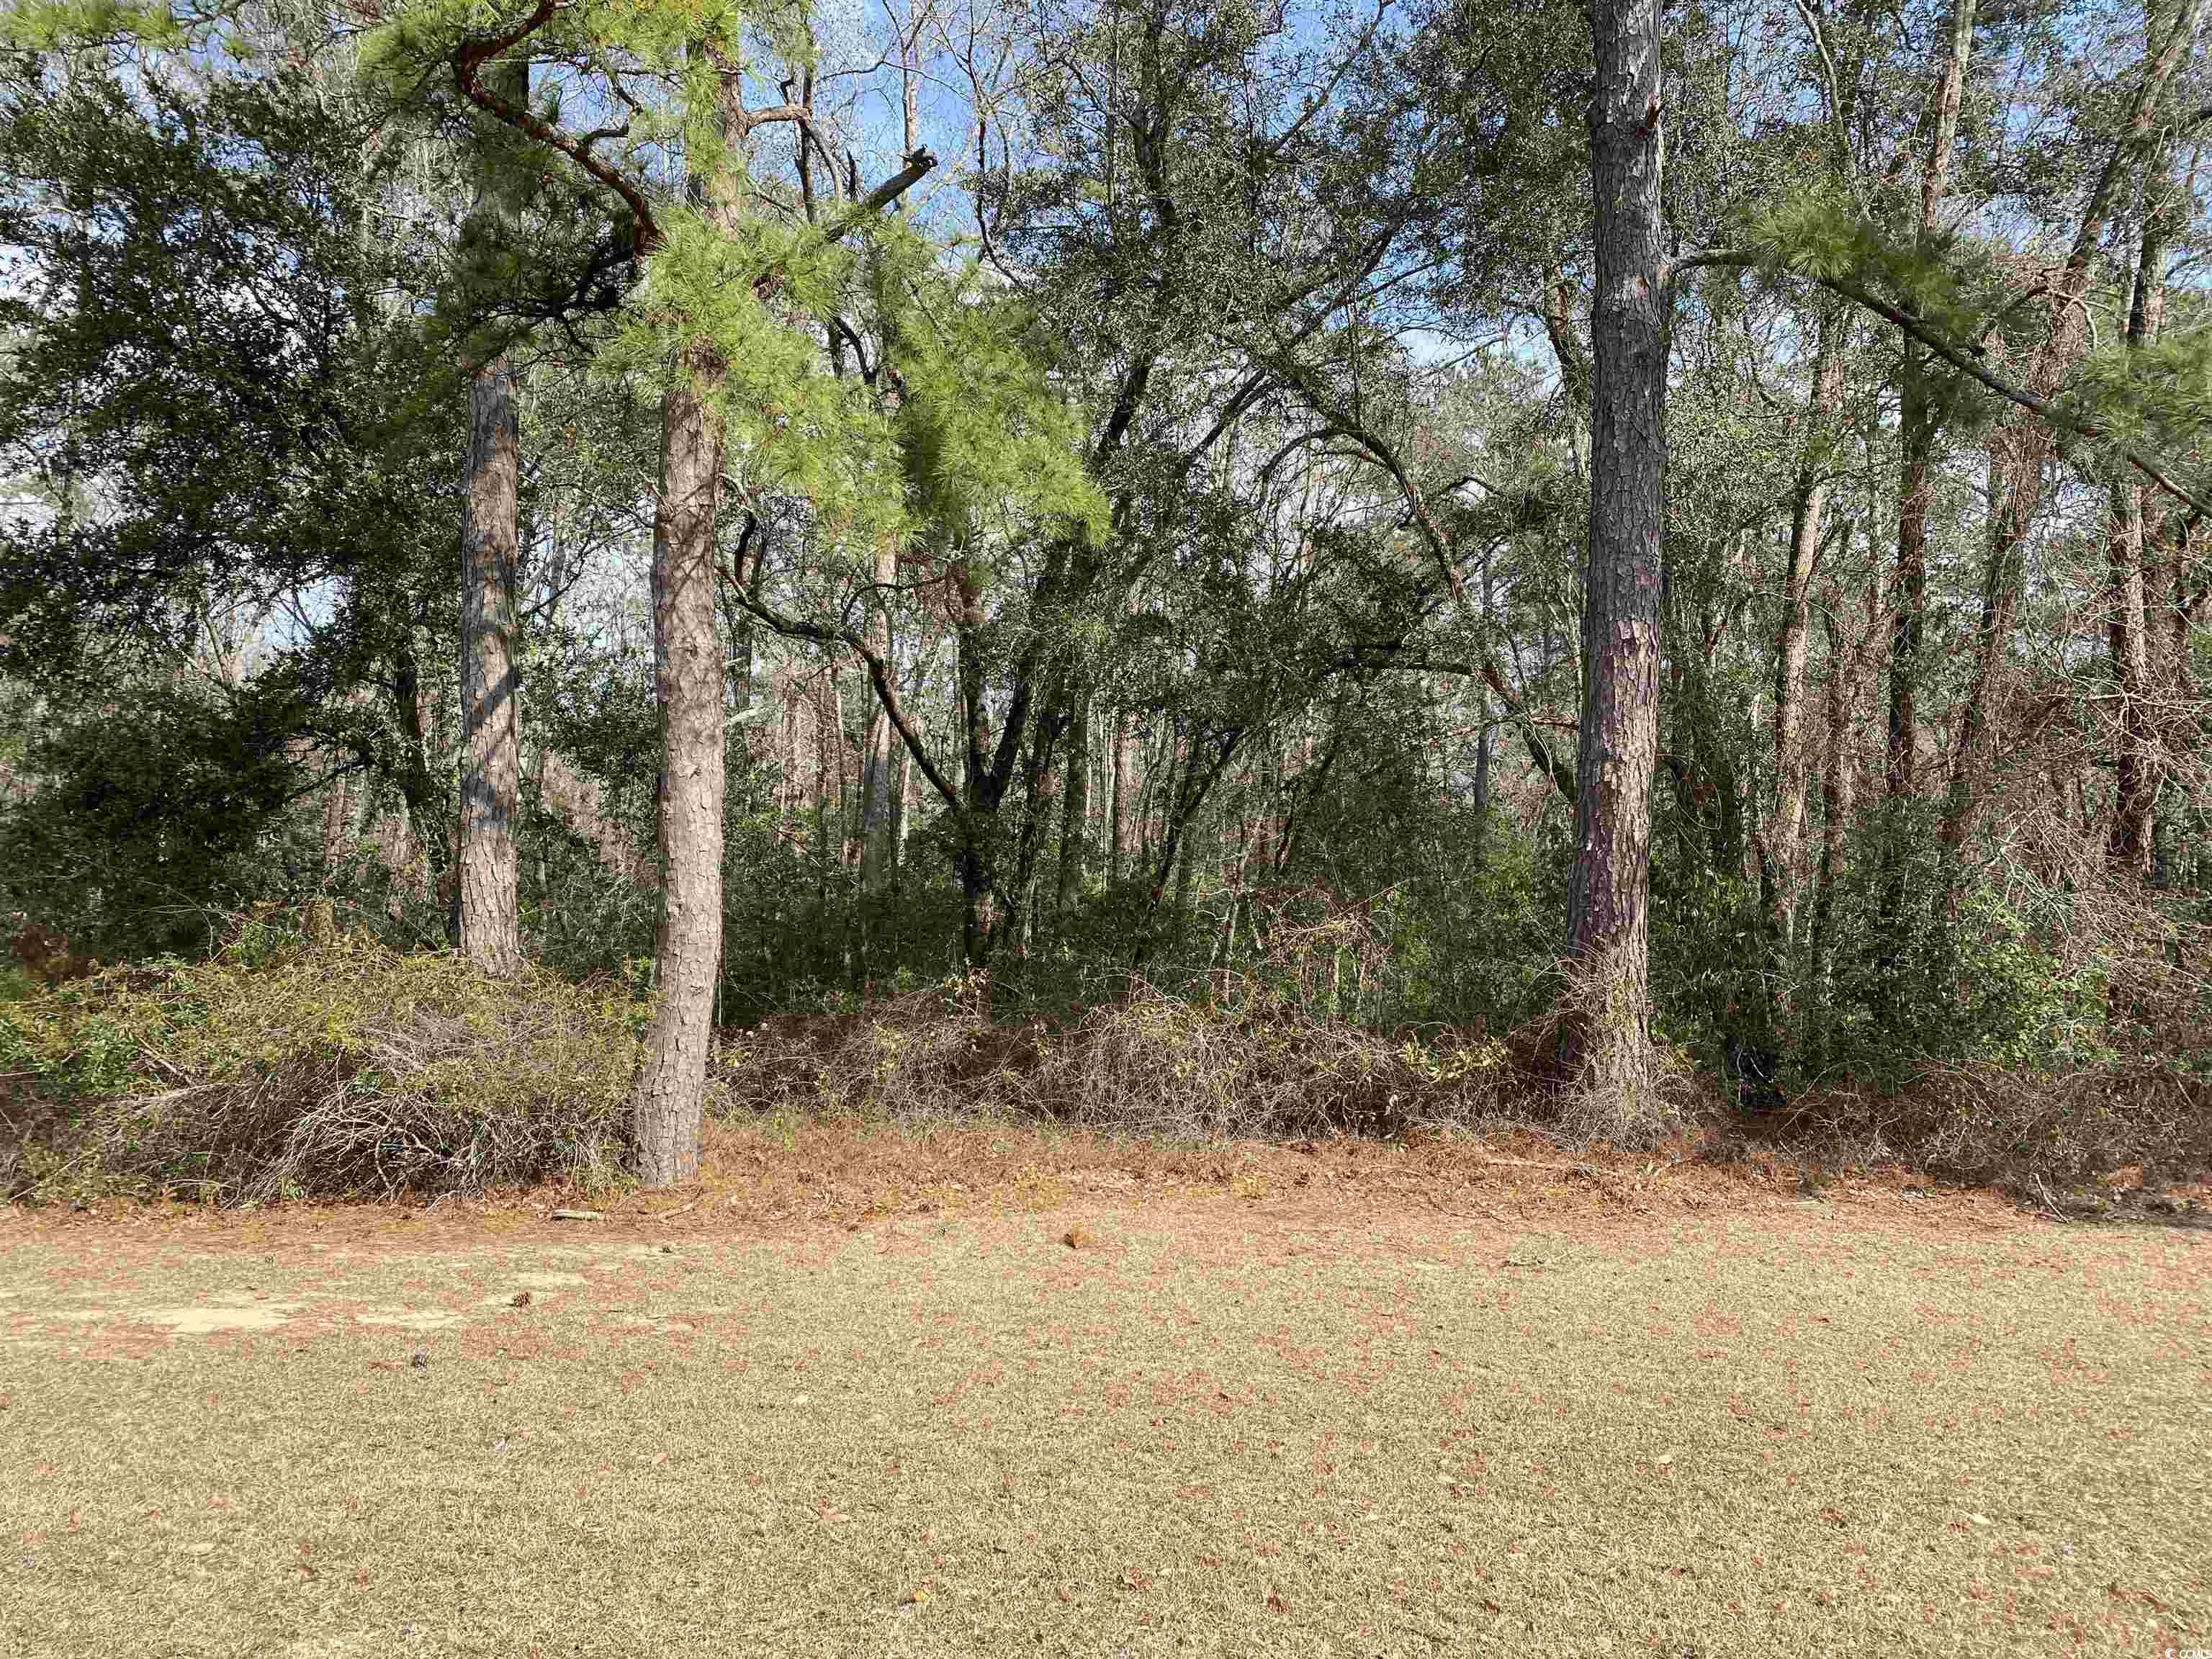 0.72 acres in beautiful heritage preserve. come build your dream home and choose your own builder and build whenever you want to. minutes from hwy 22 & 31, conway and international drive that will take to into myrtle beach. now you can live on hwy 90 and work in myrtle beach with the international drive access.